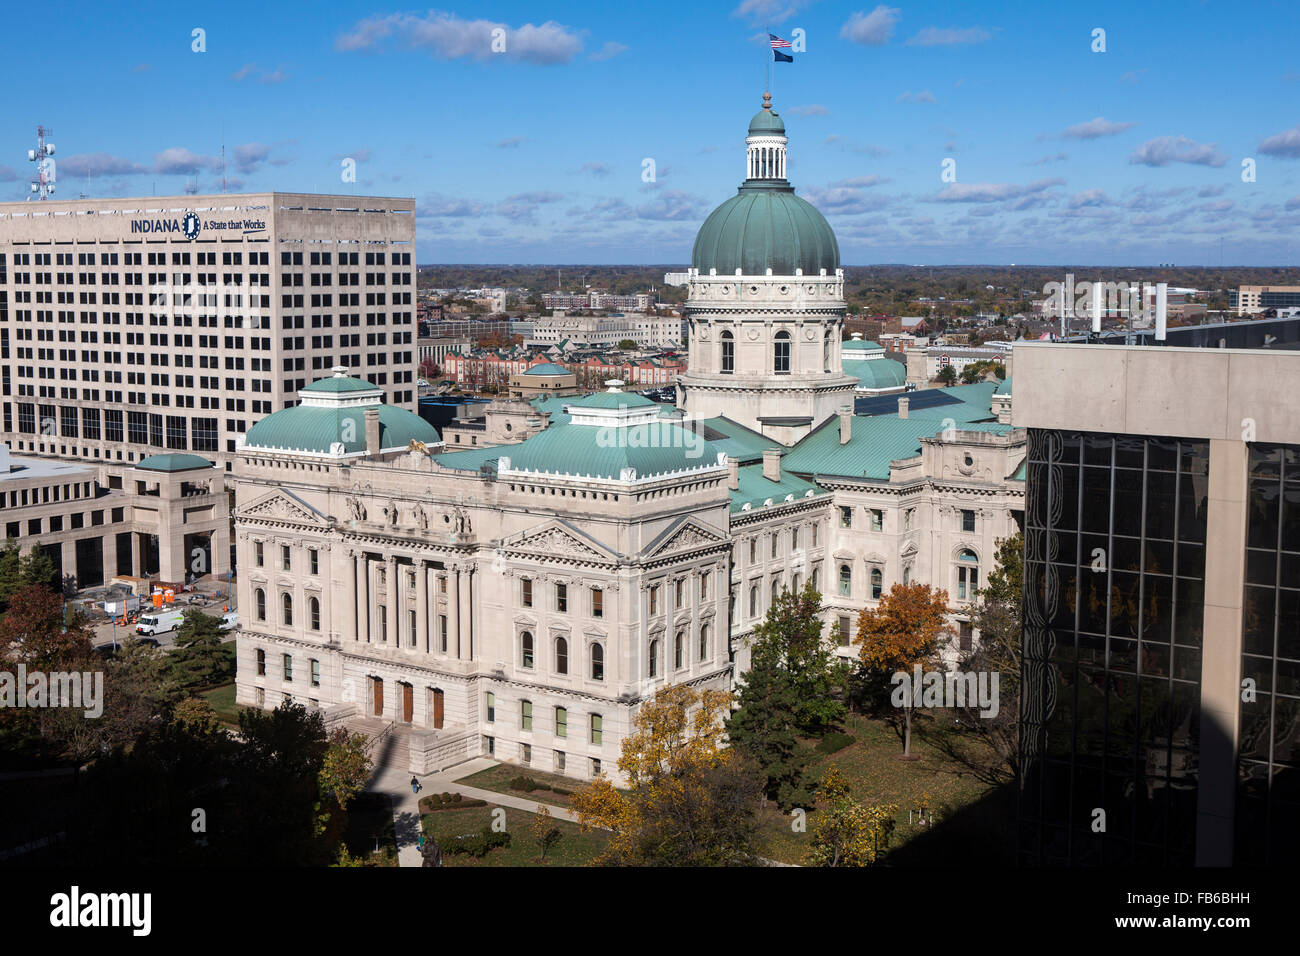 Aerial view of Indiana State Capitol, Indianapolis, Indiana, United States of America Stock Photo